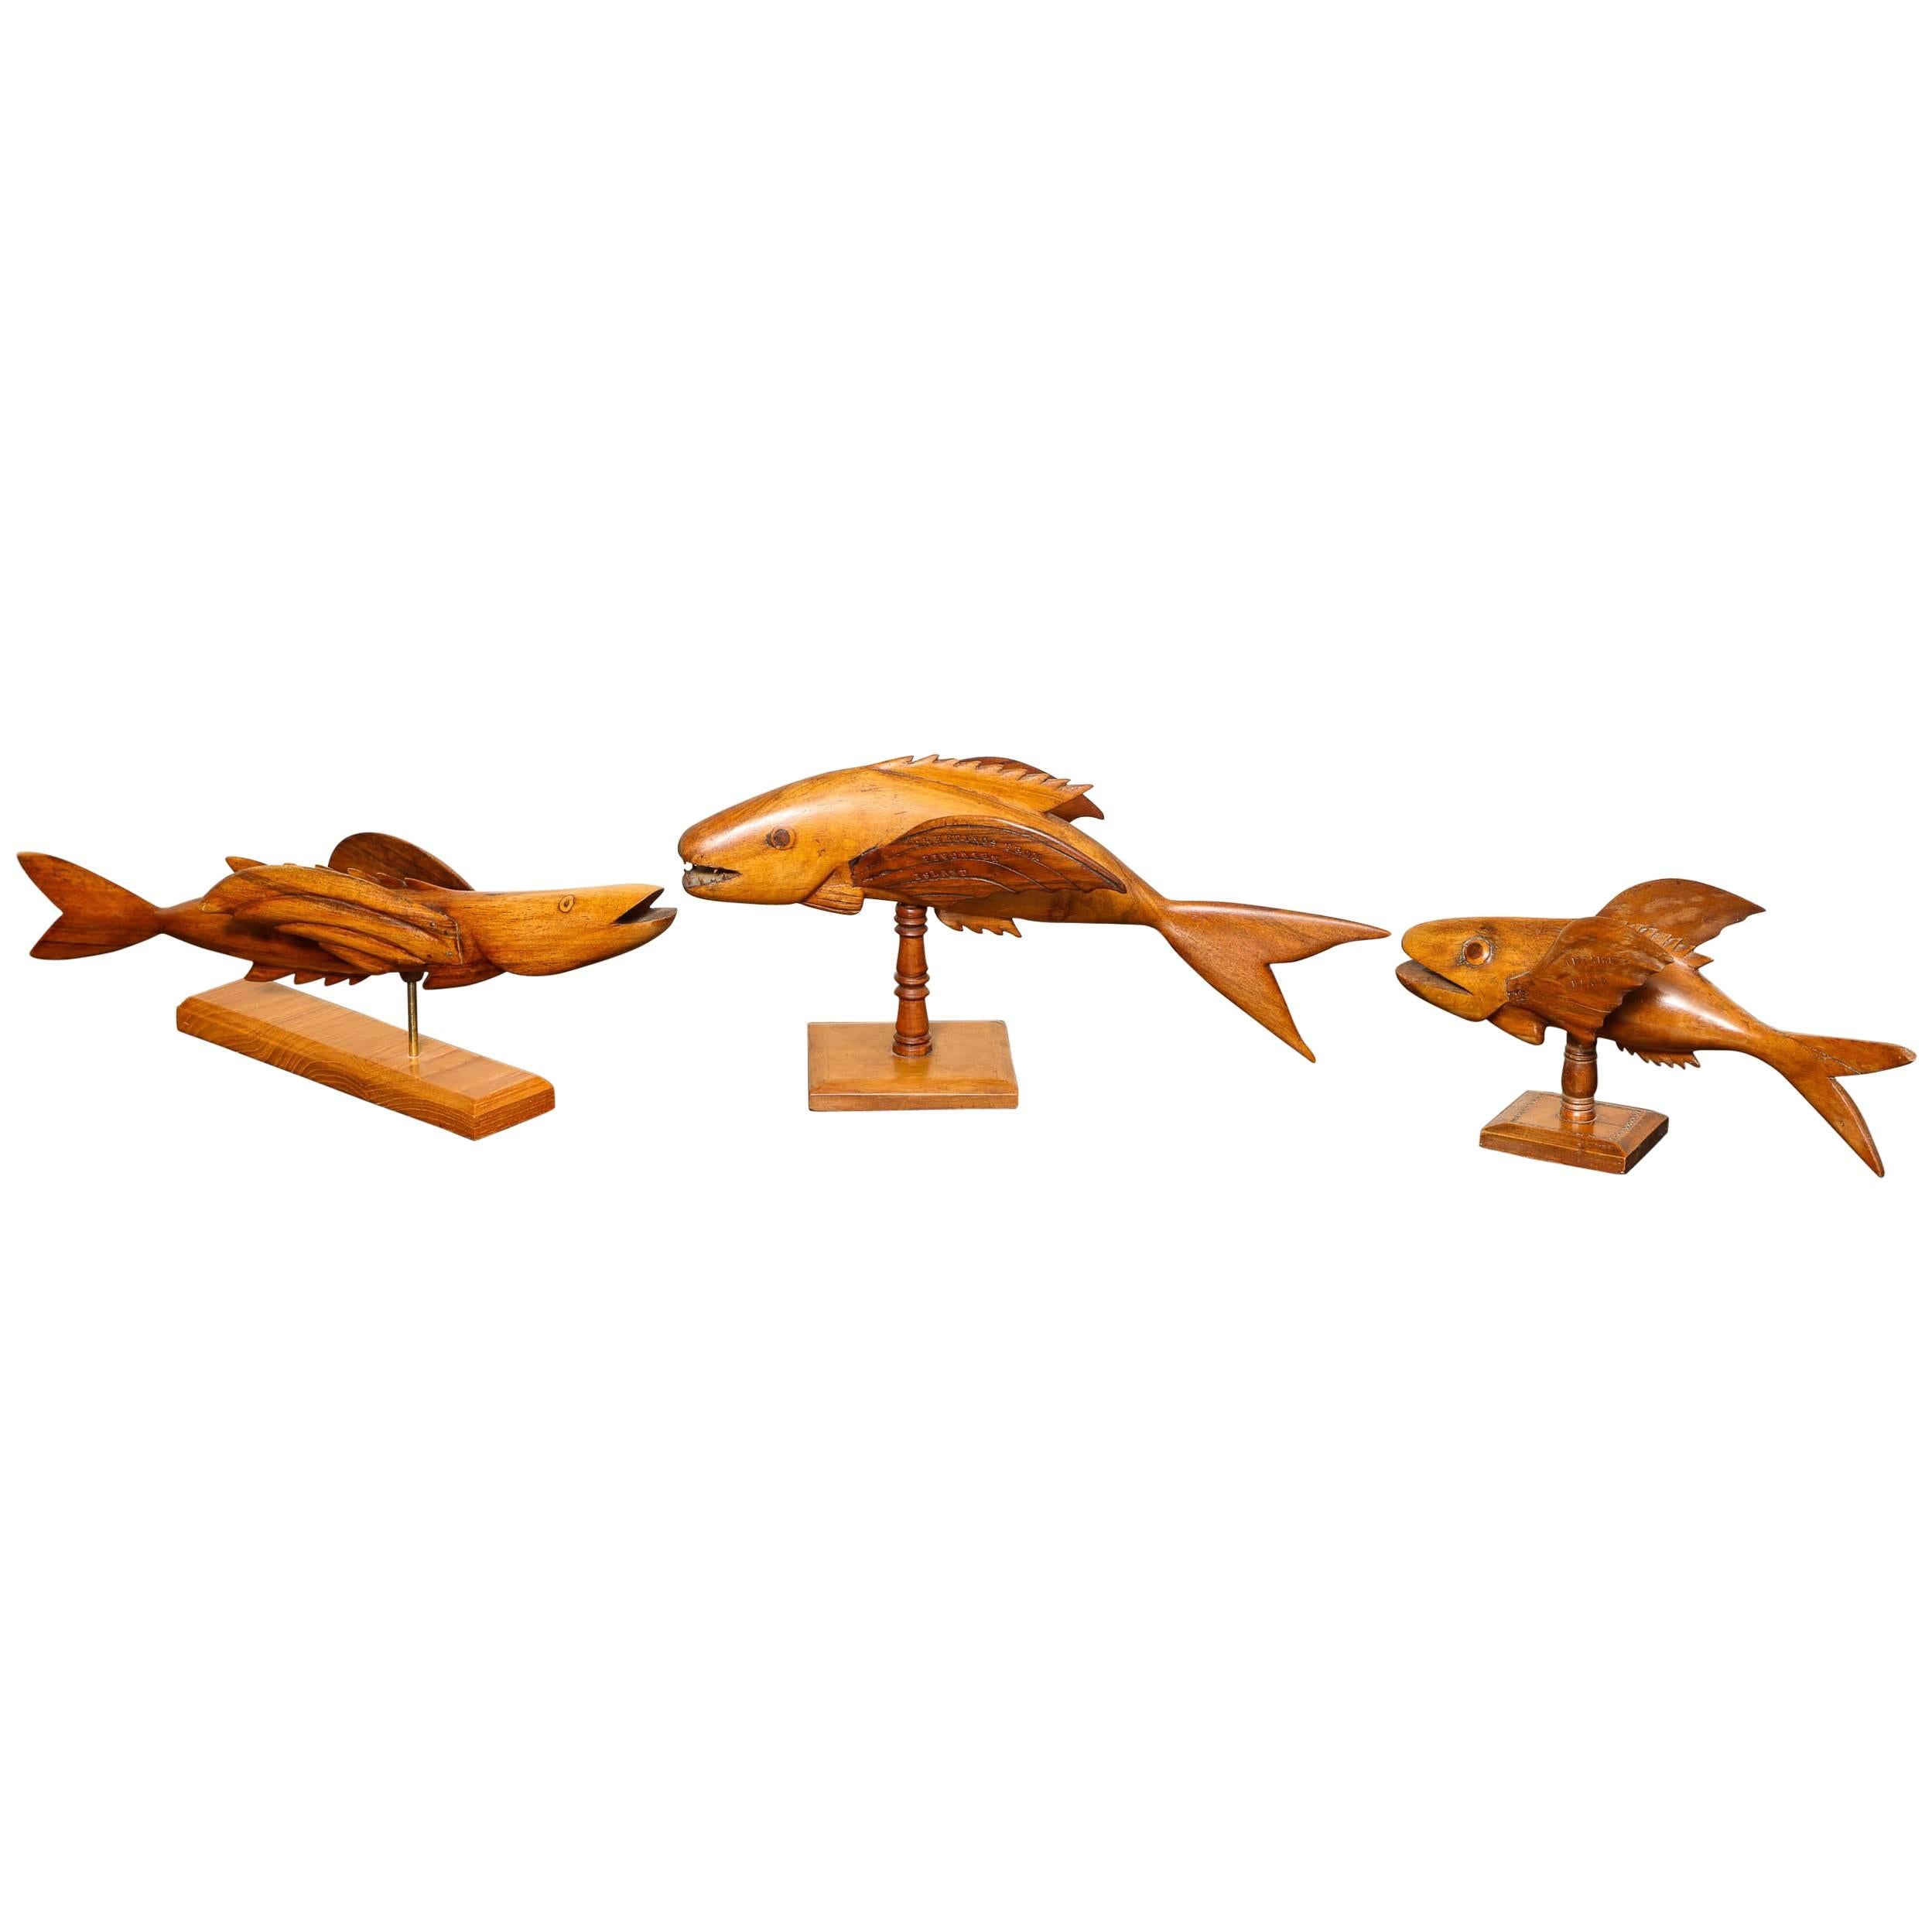 Flying fish (three available) carved of exotic wood having wings and mounted on stands. Differing shapes and sizes, as indicated. Each stamped Pitcairn Island, with one signed Lancy Christian, and another Len Brown. Pitcairn Island is famous as the